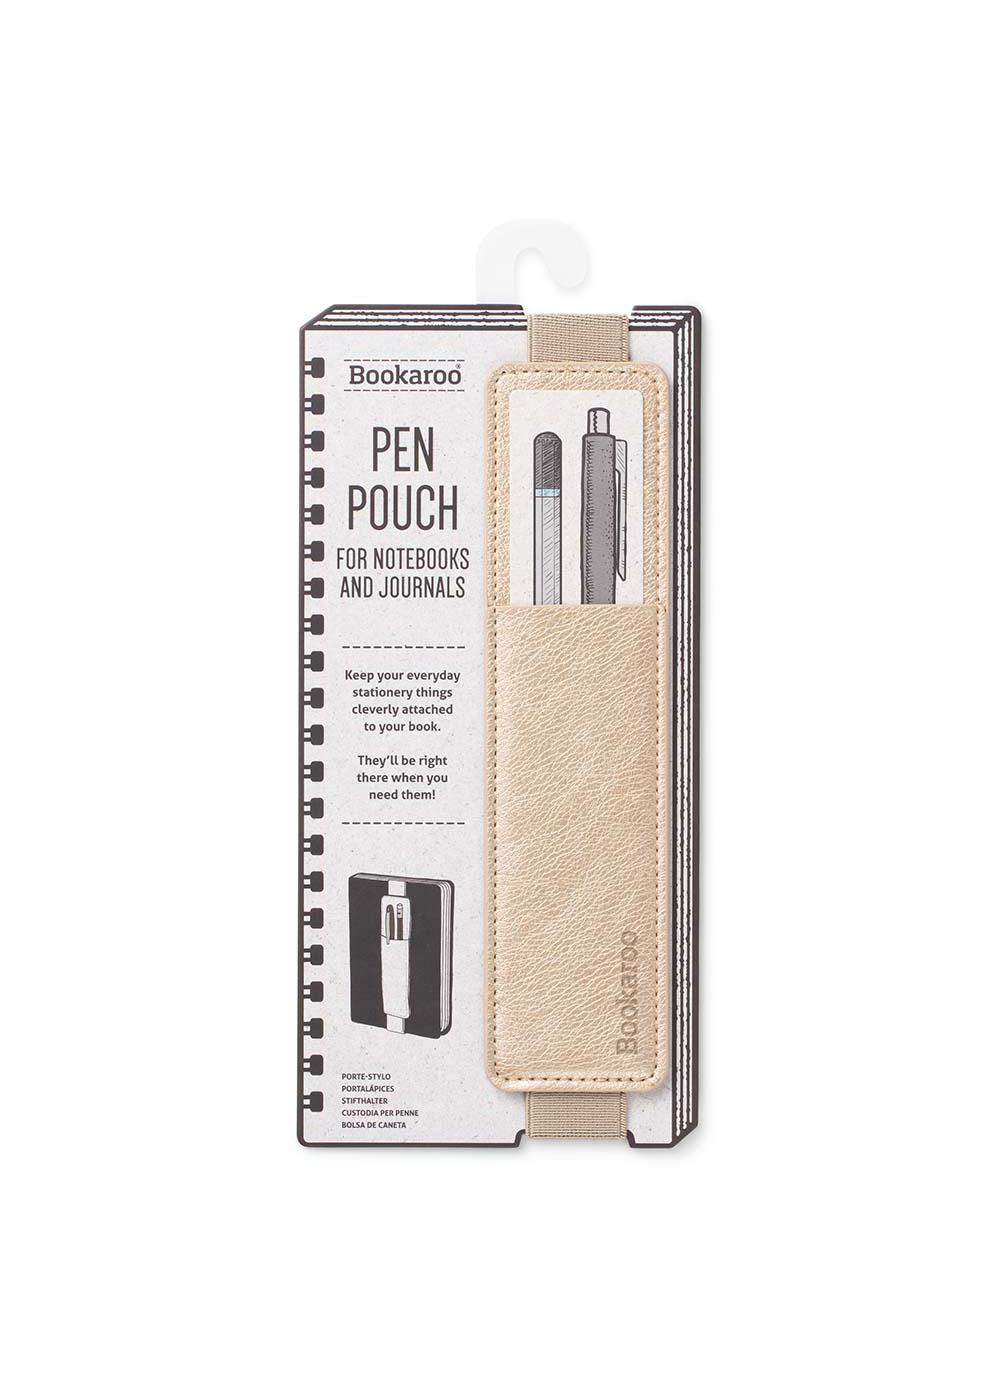 Bookaroo Pen Pouch for Notebook & Journal - Gold; image 1 of 2